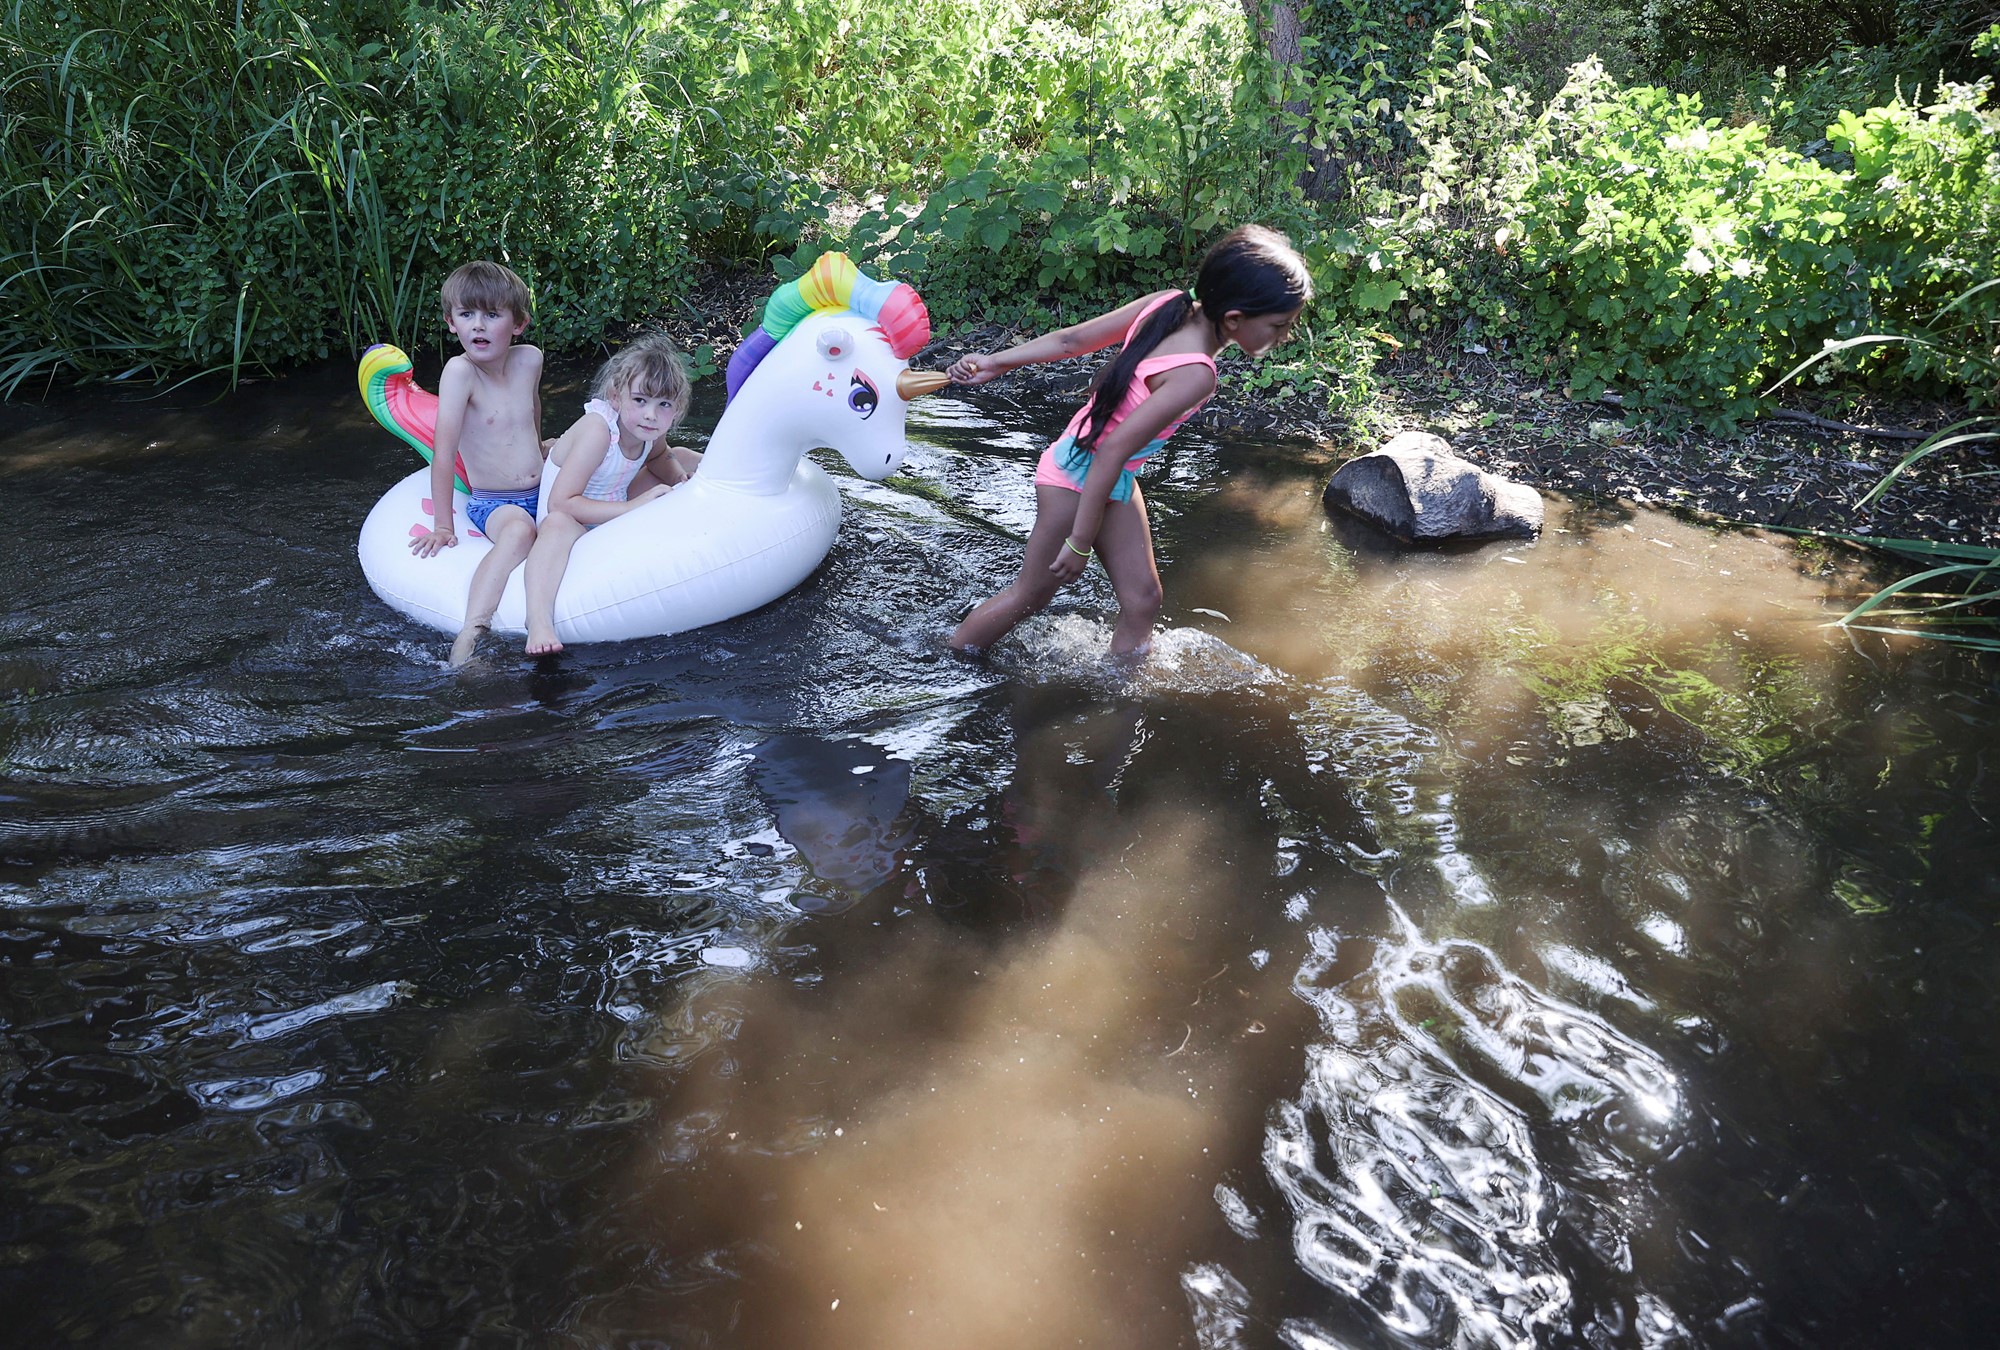 Young children play on a unicorn floating pool toy in a river.